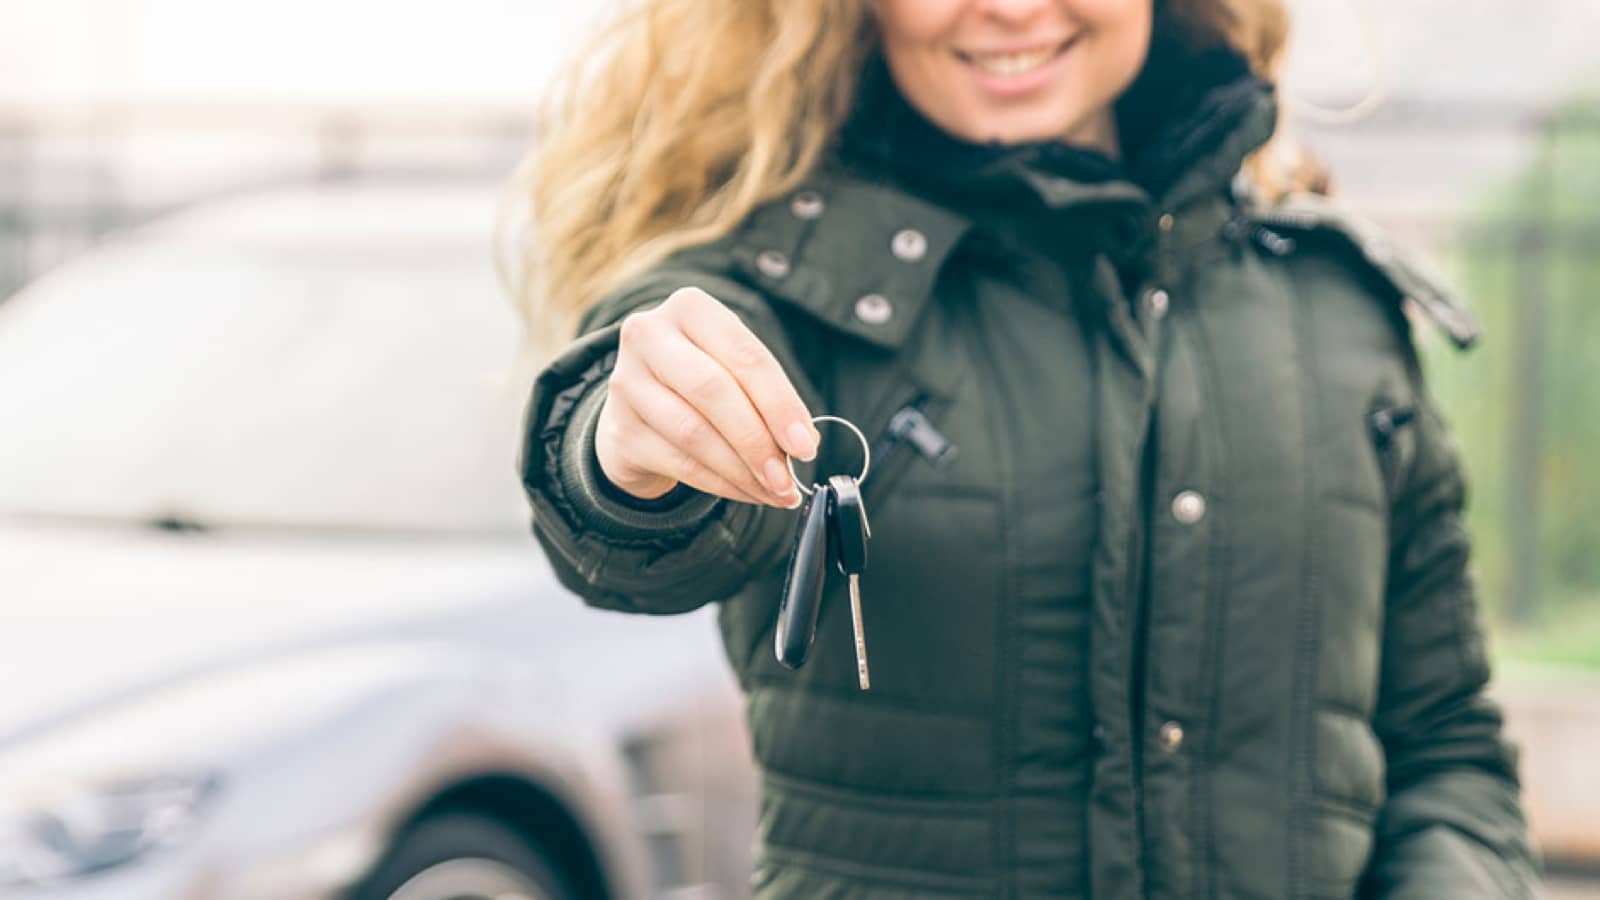 Smiling woman holding out car keys